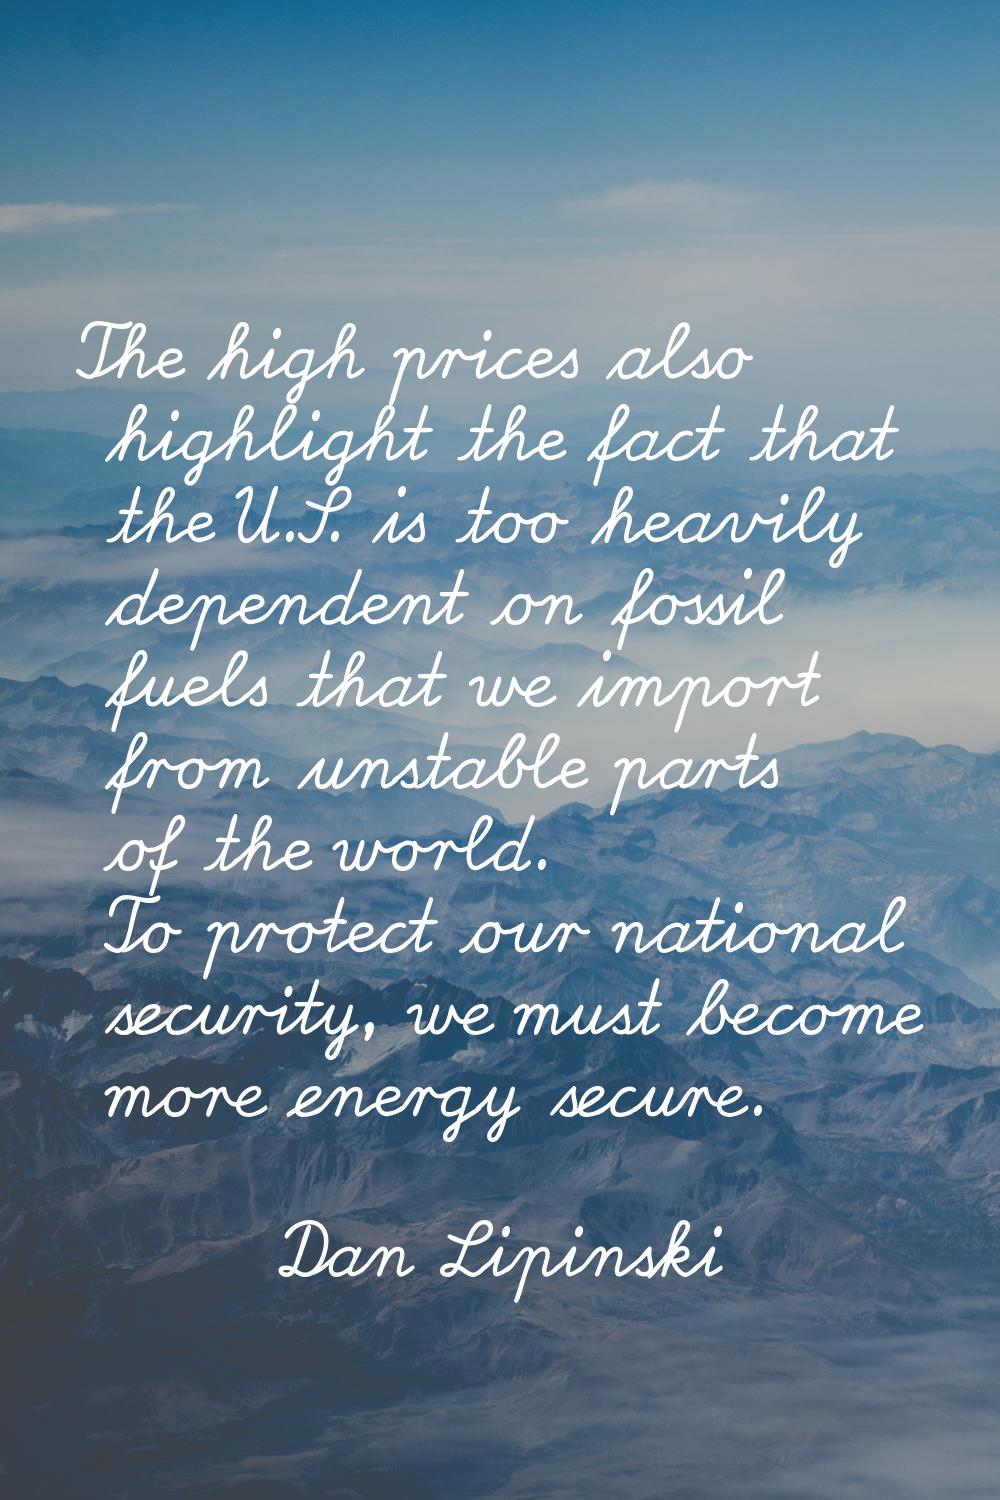 The high prices also highlight the fact that the U.S. is too heavily dependent on fossil fuels that